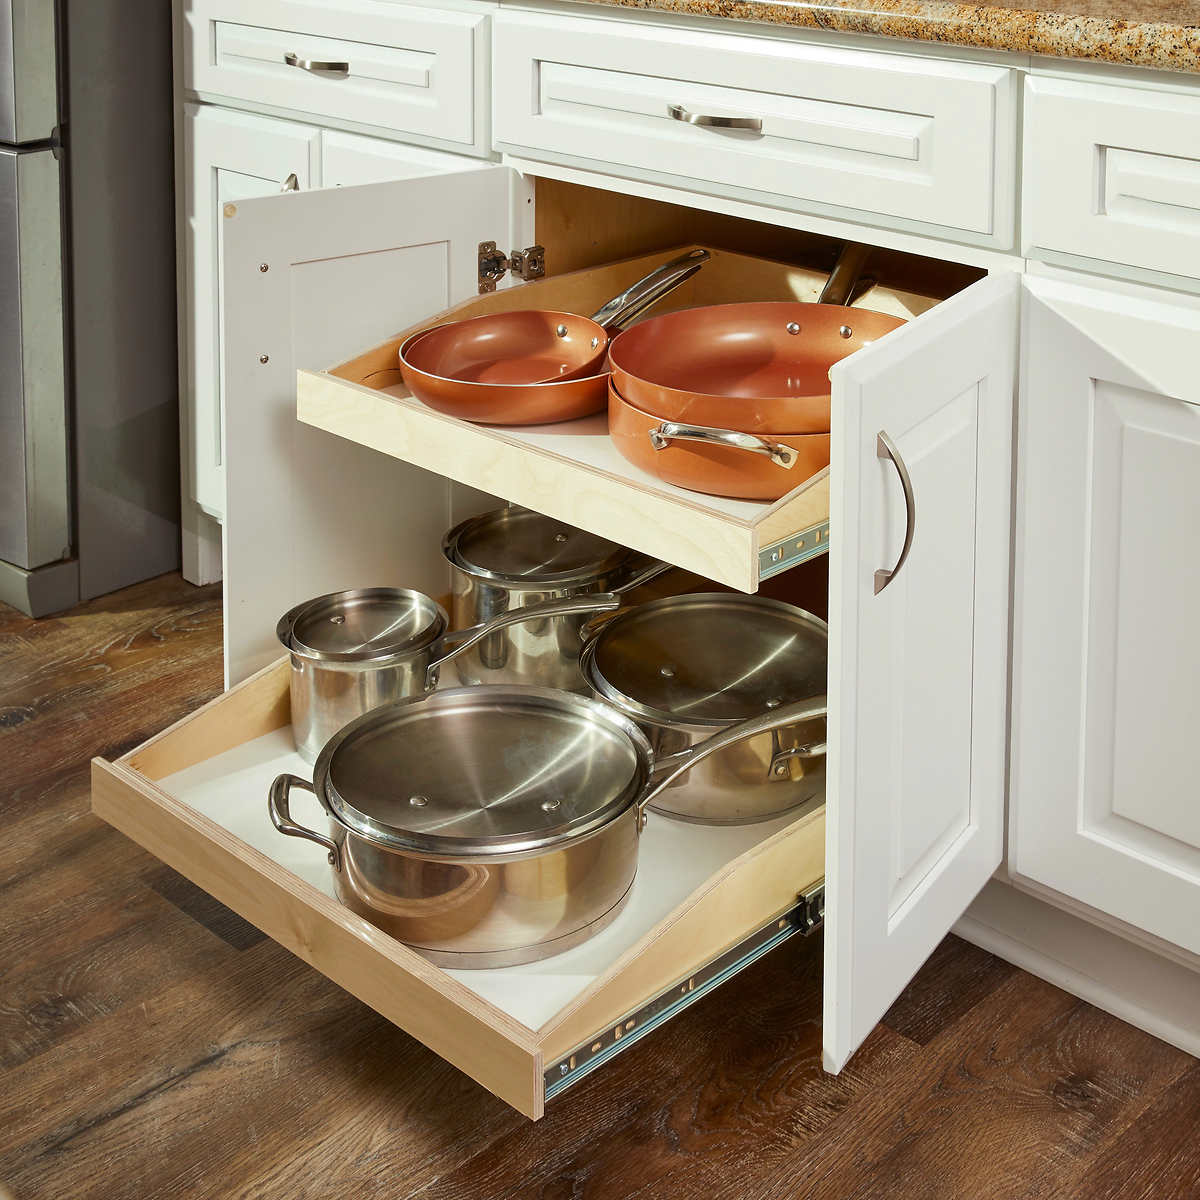 Slide-Out Cabinet Organizer for Knives and Tools - Gast